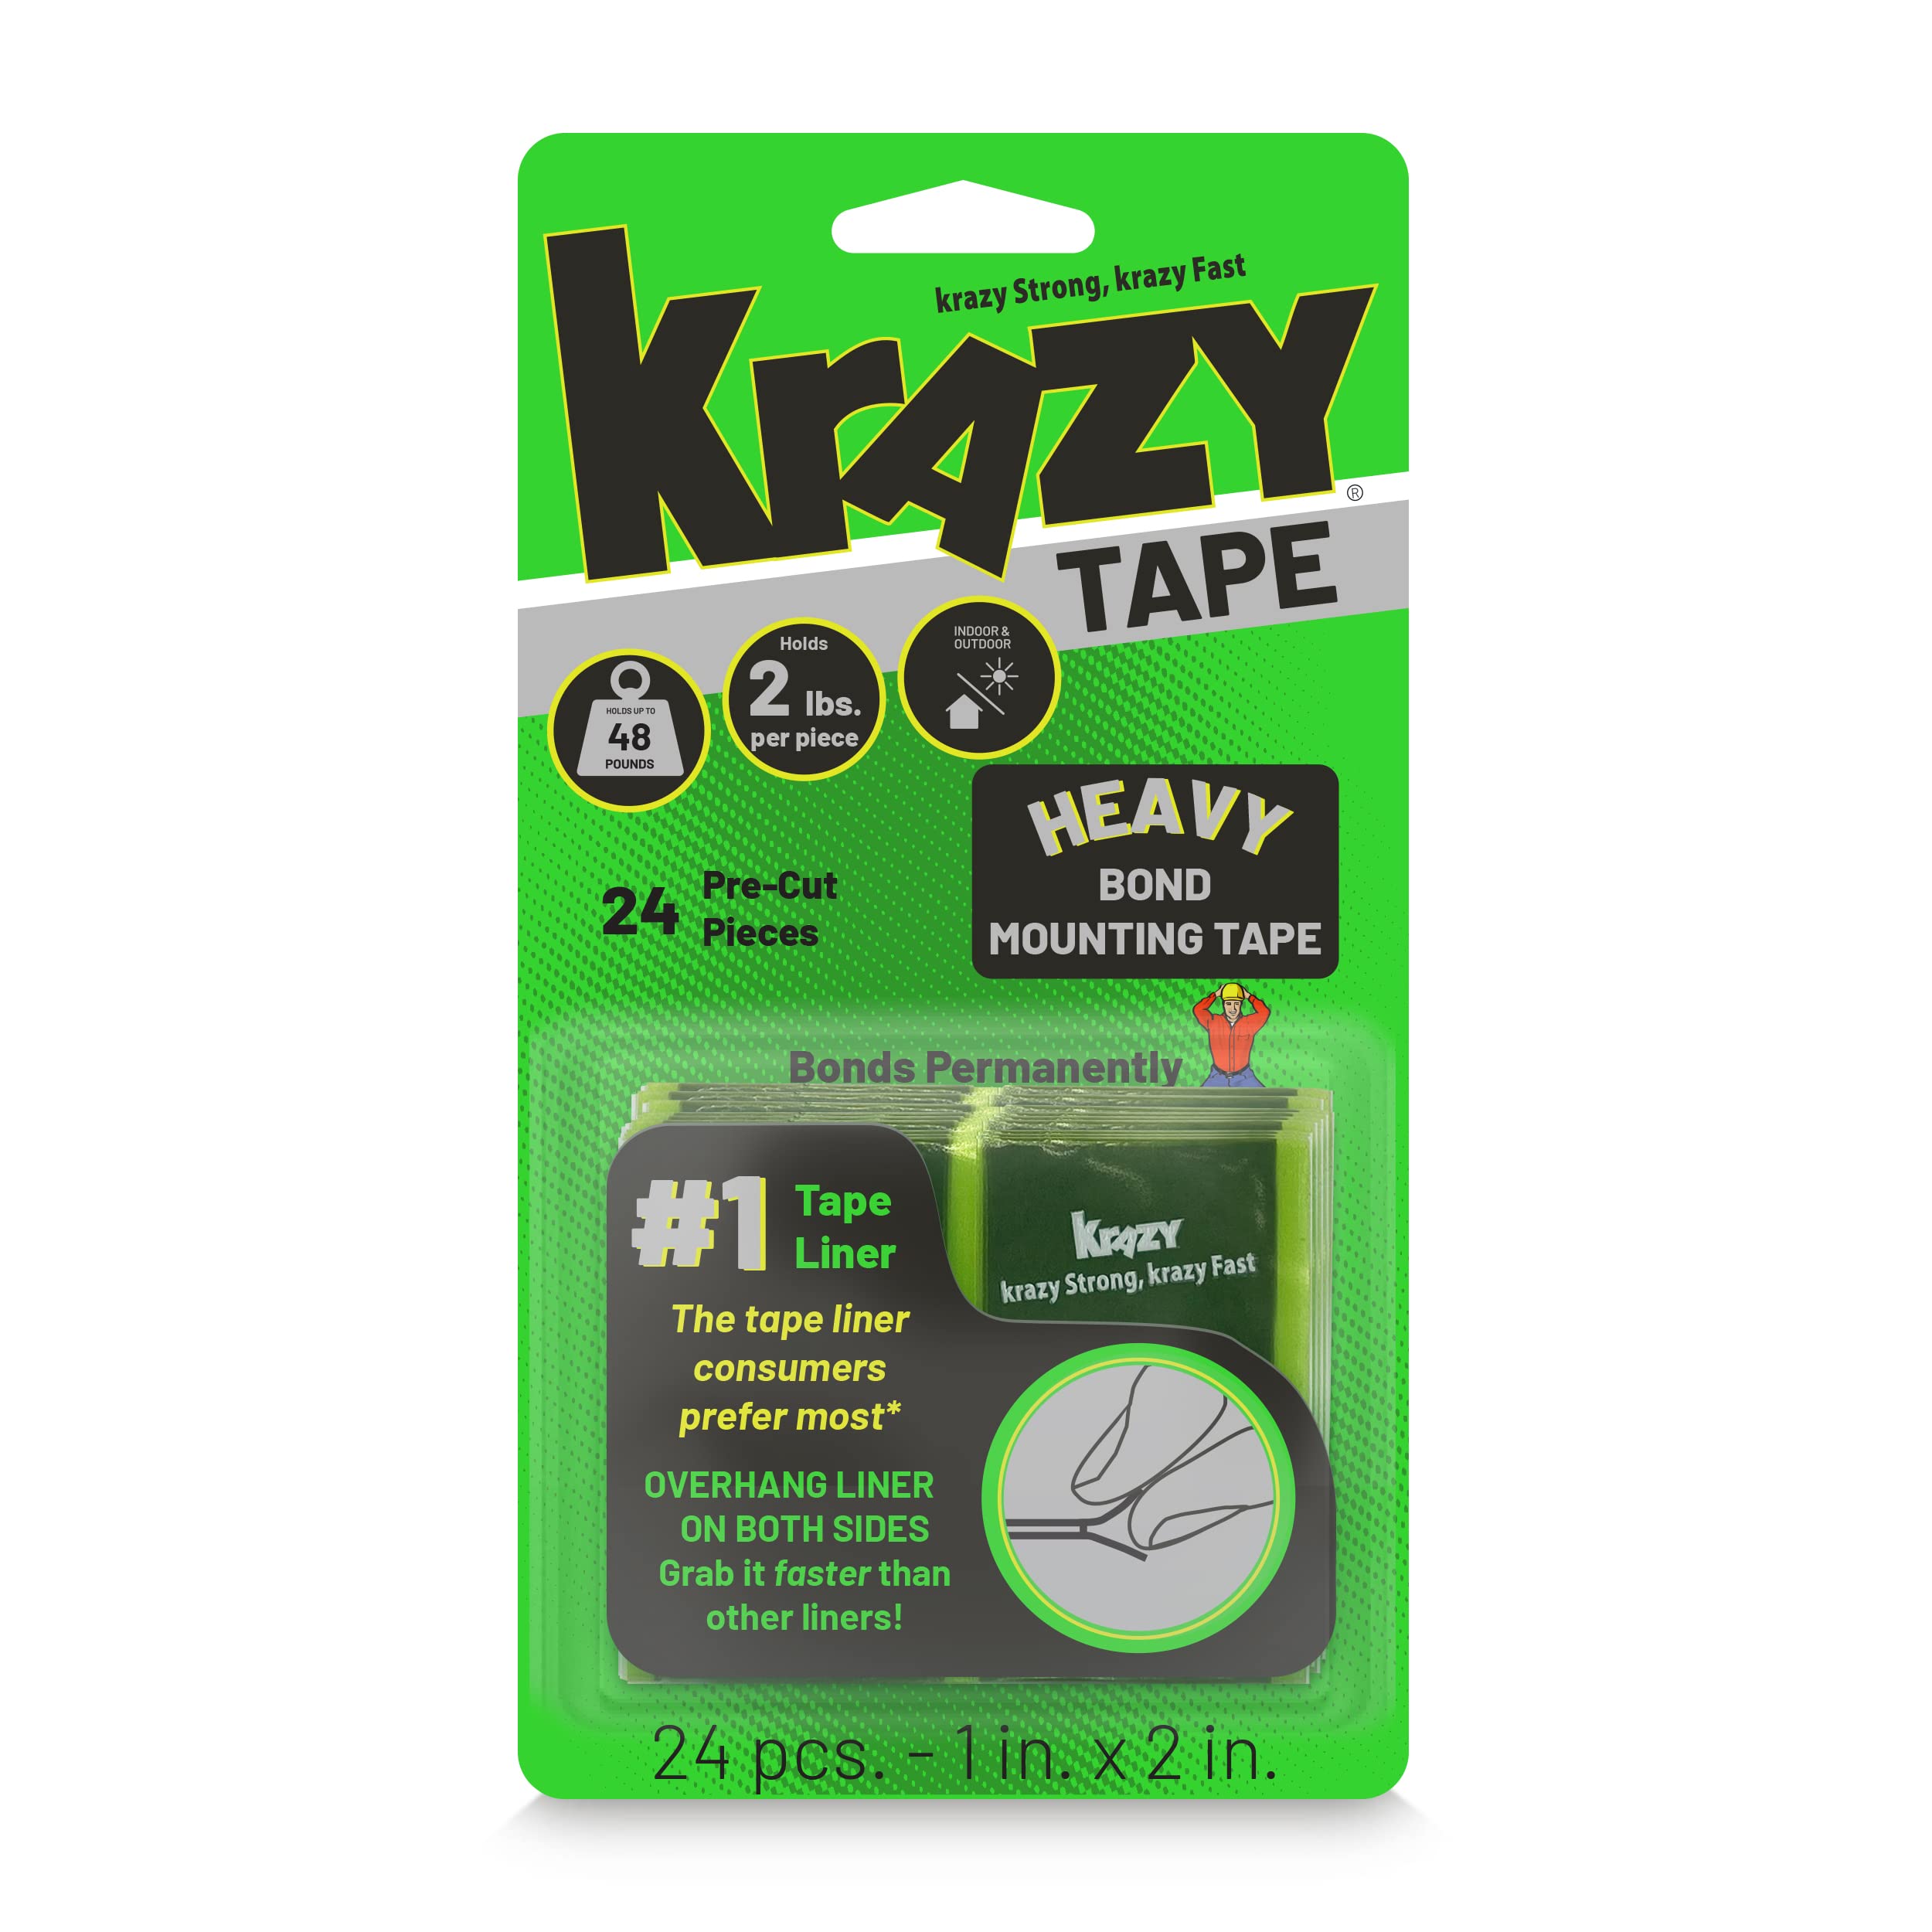 Krazy Tape Strong Bond Mounting Tape Heavy Duty Double Sided Tape